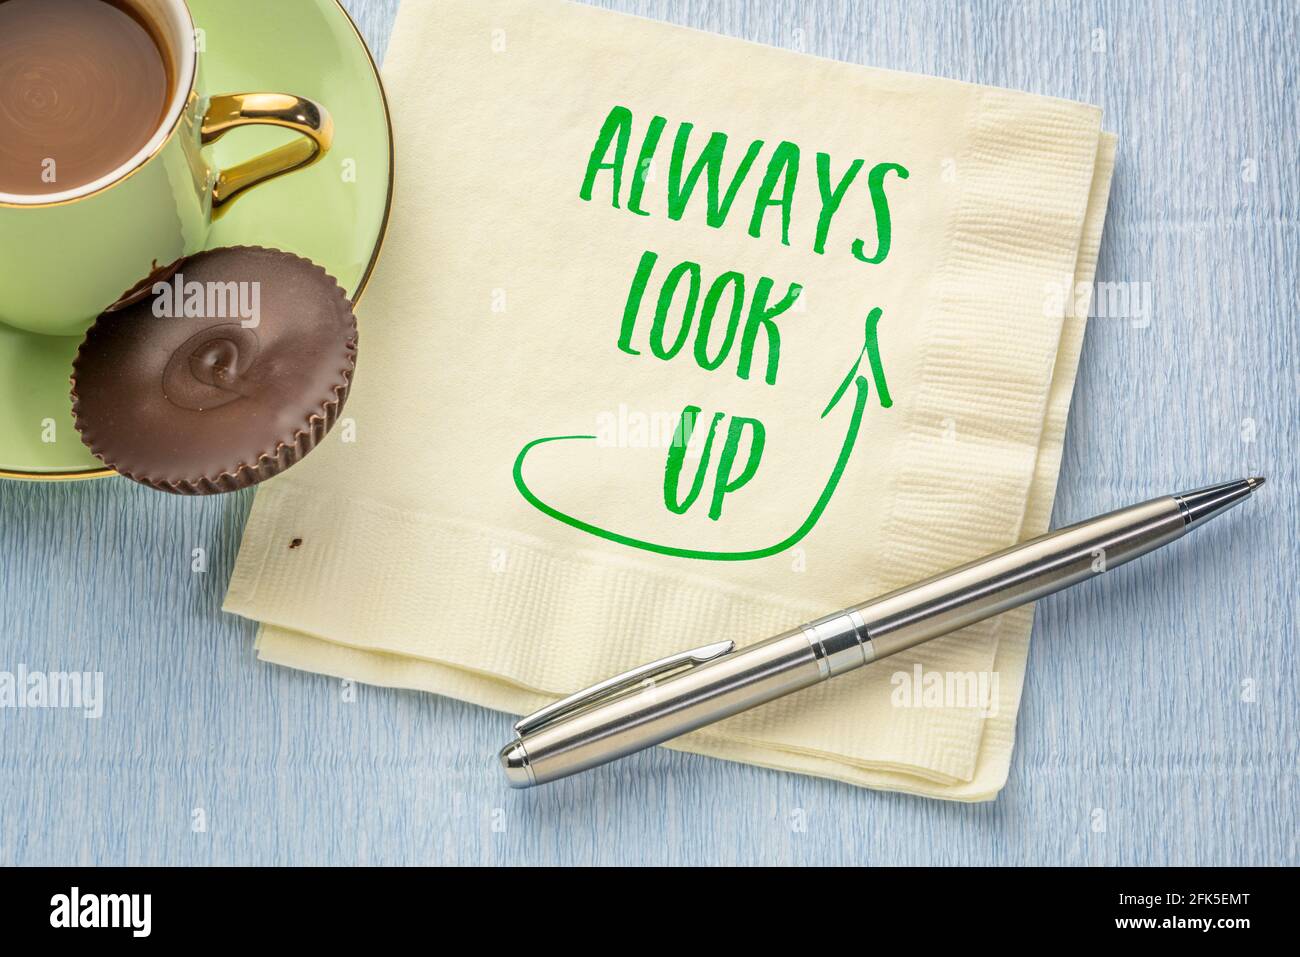 always look up - inspirational note on a napkin with a cup of coffee Stock Photo